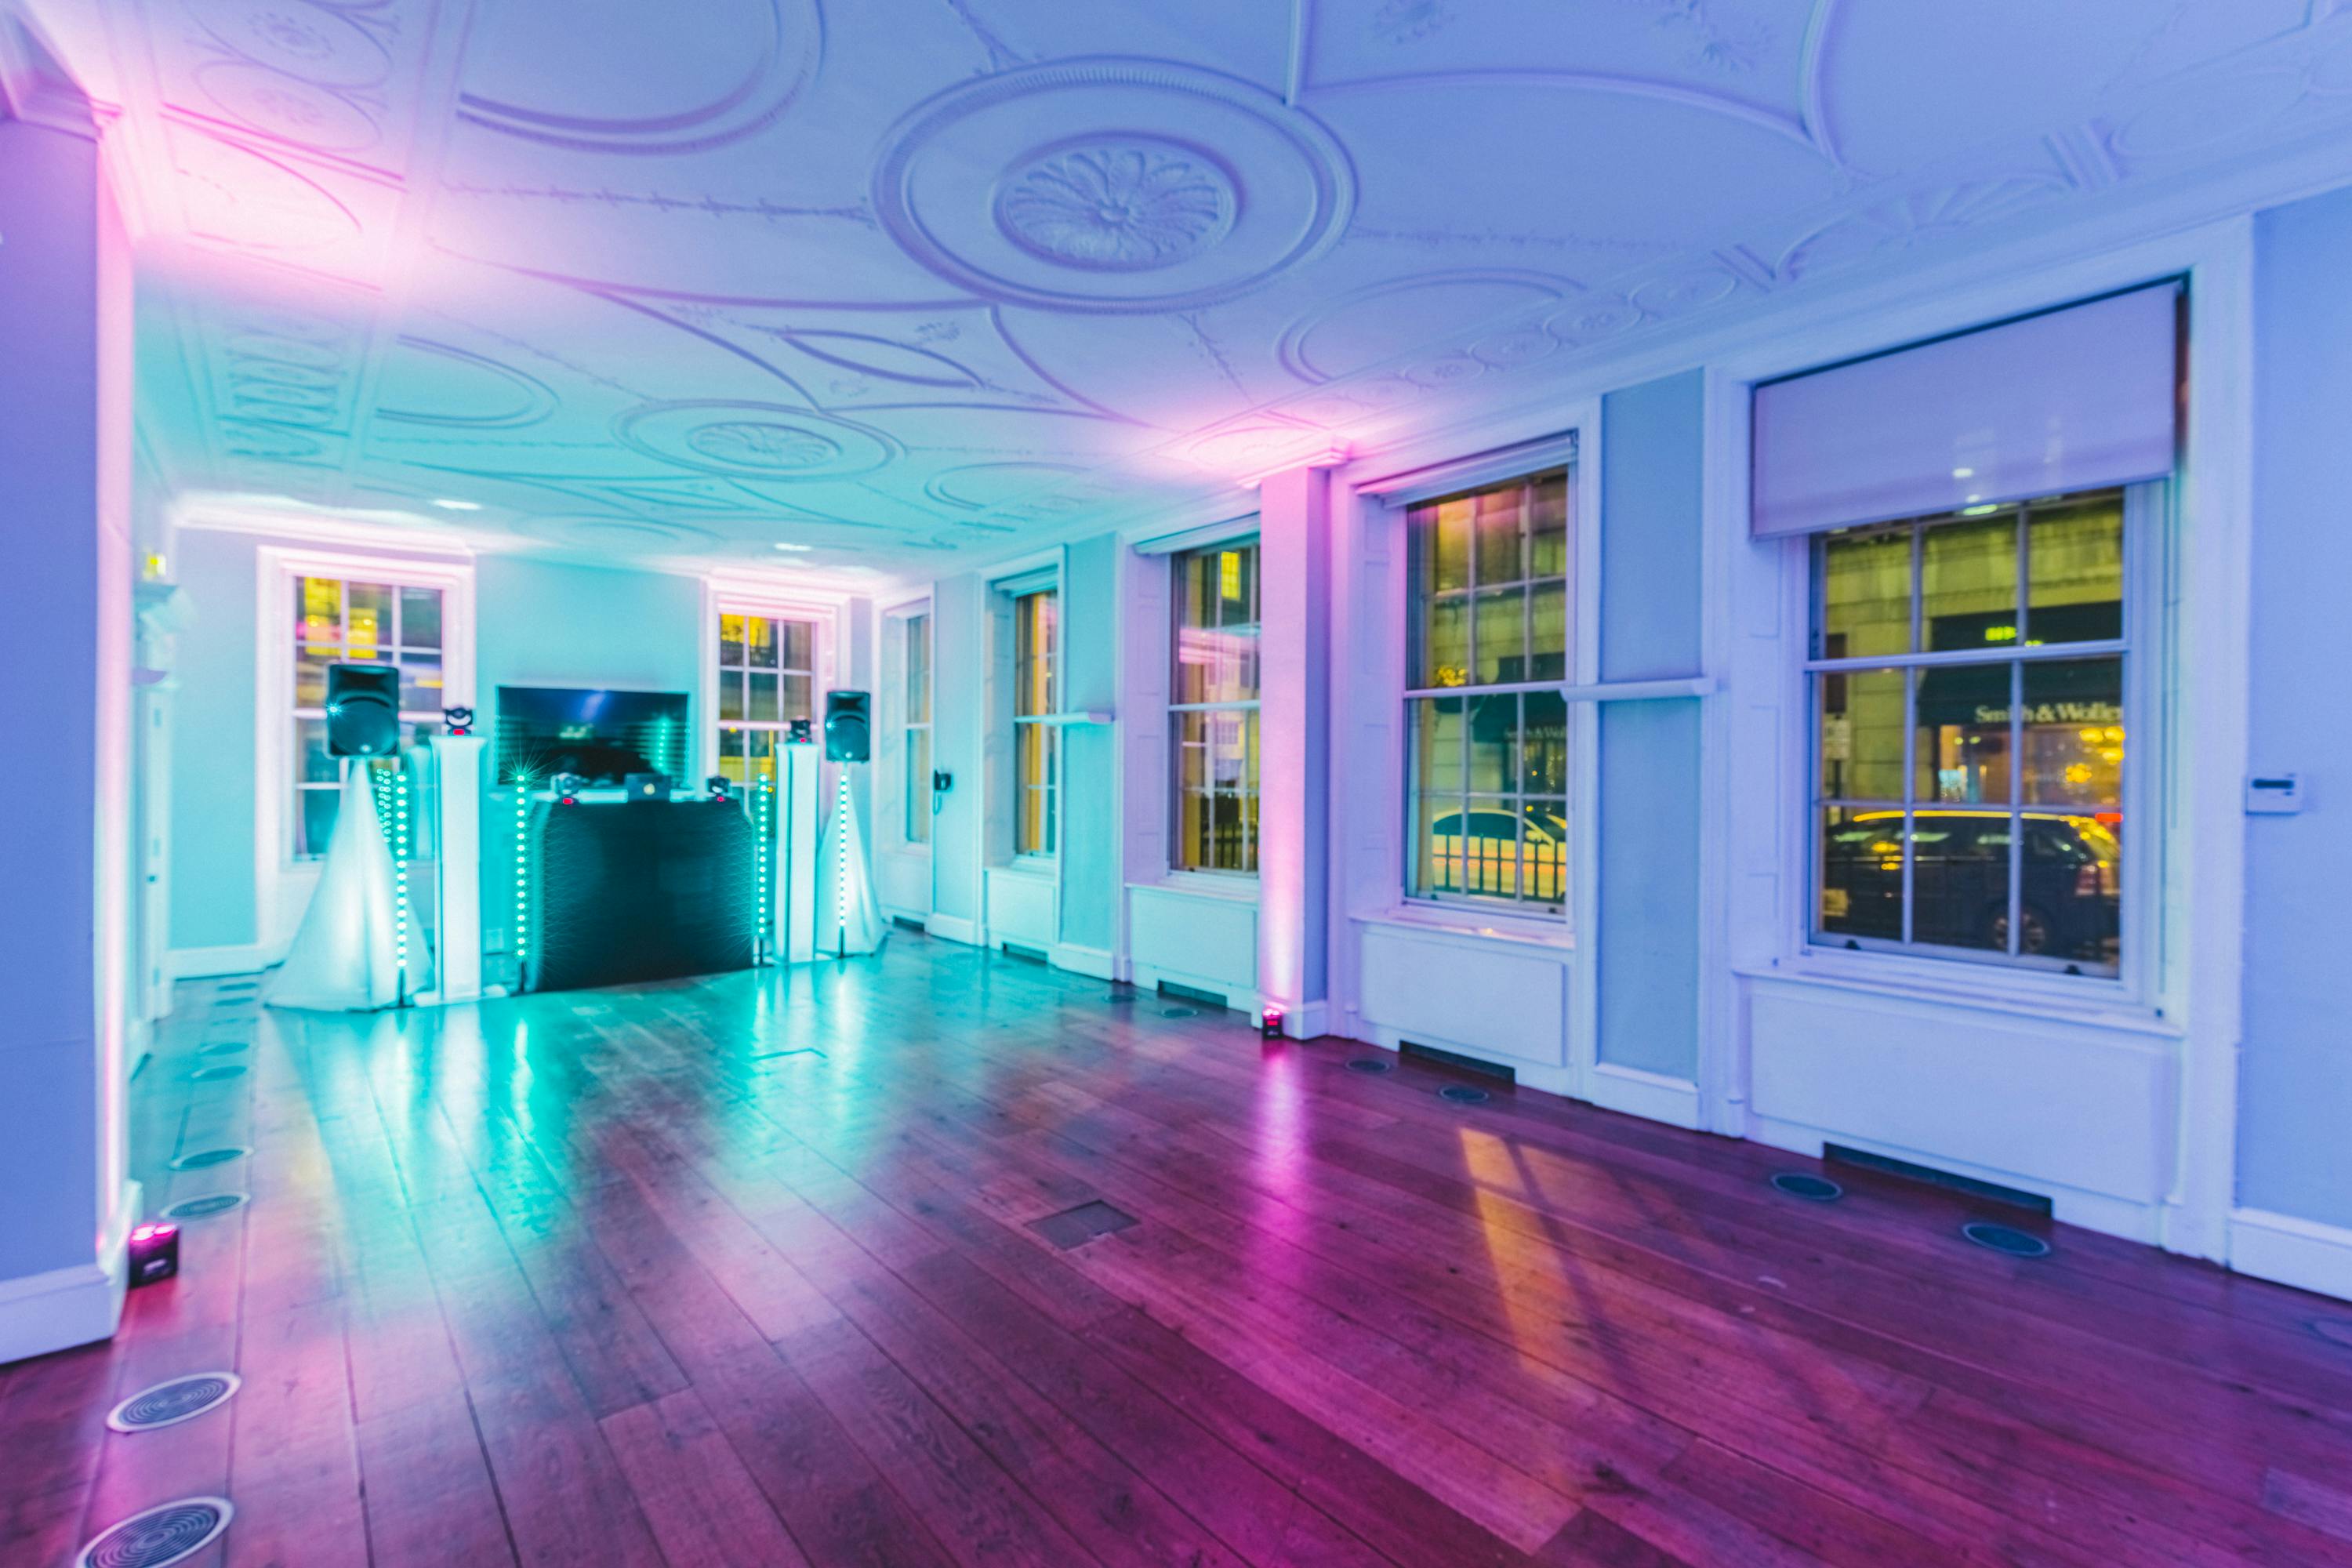 Small Party Venues - RSA House - Events in The Tavern Room - Banner